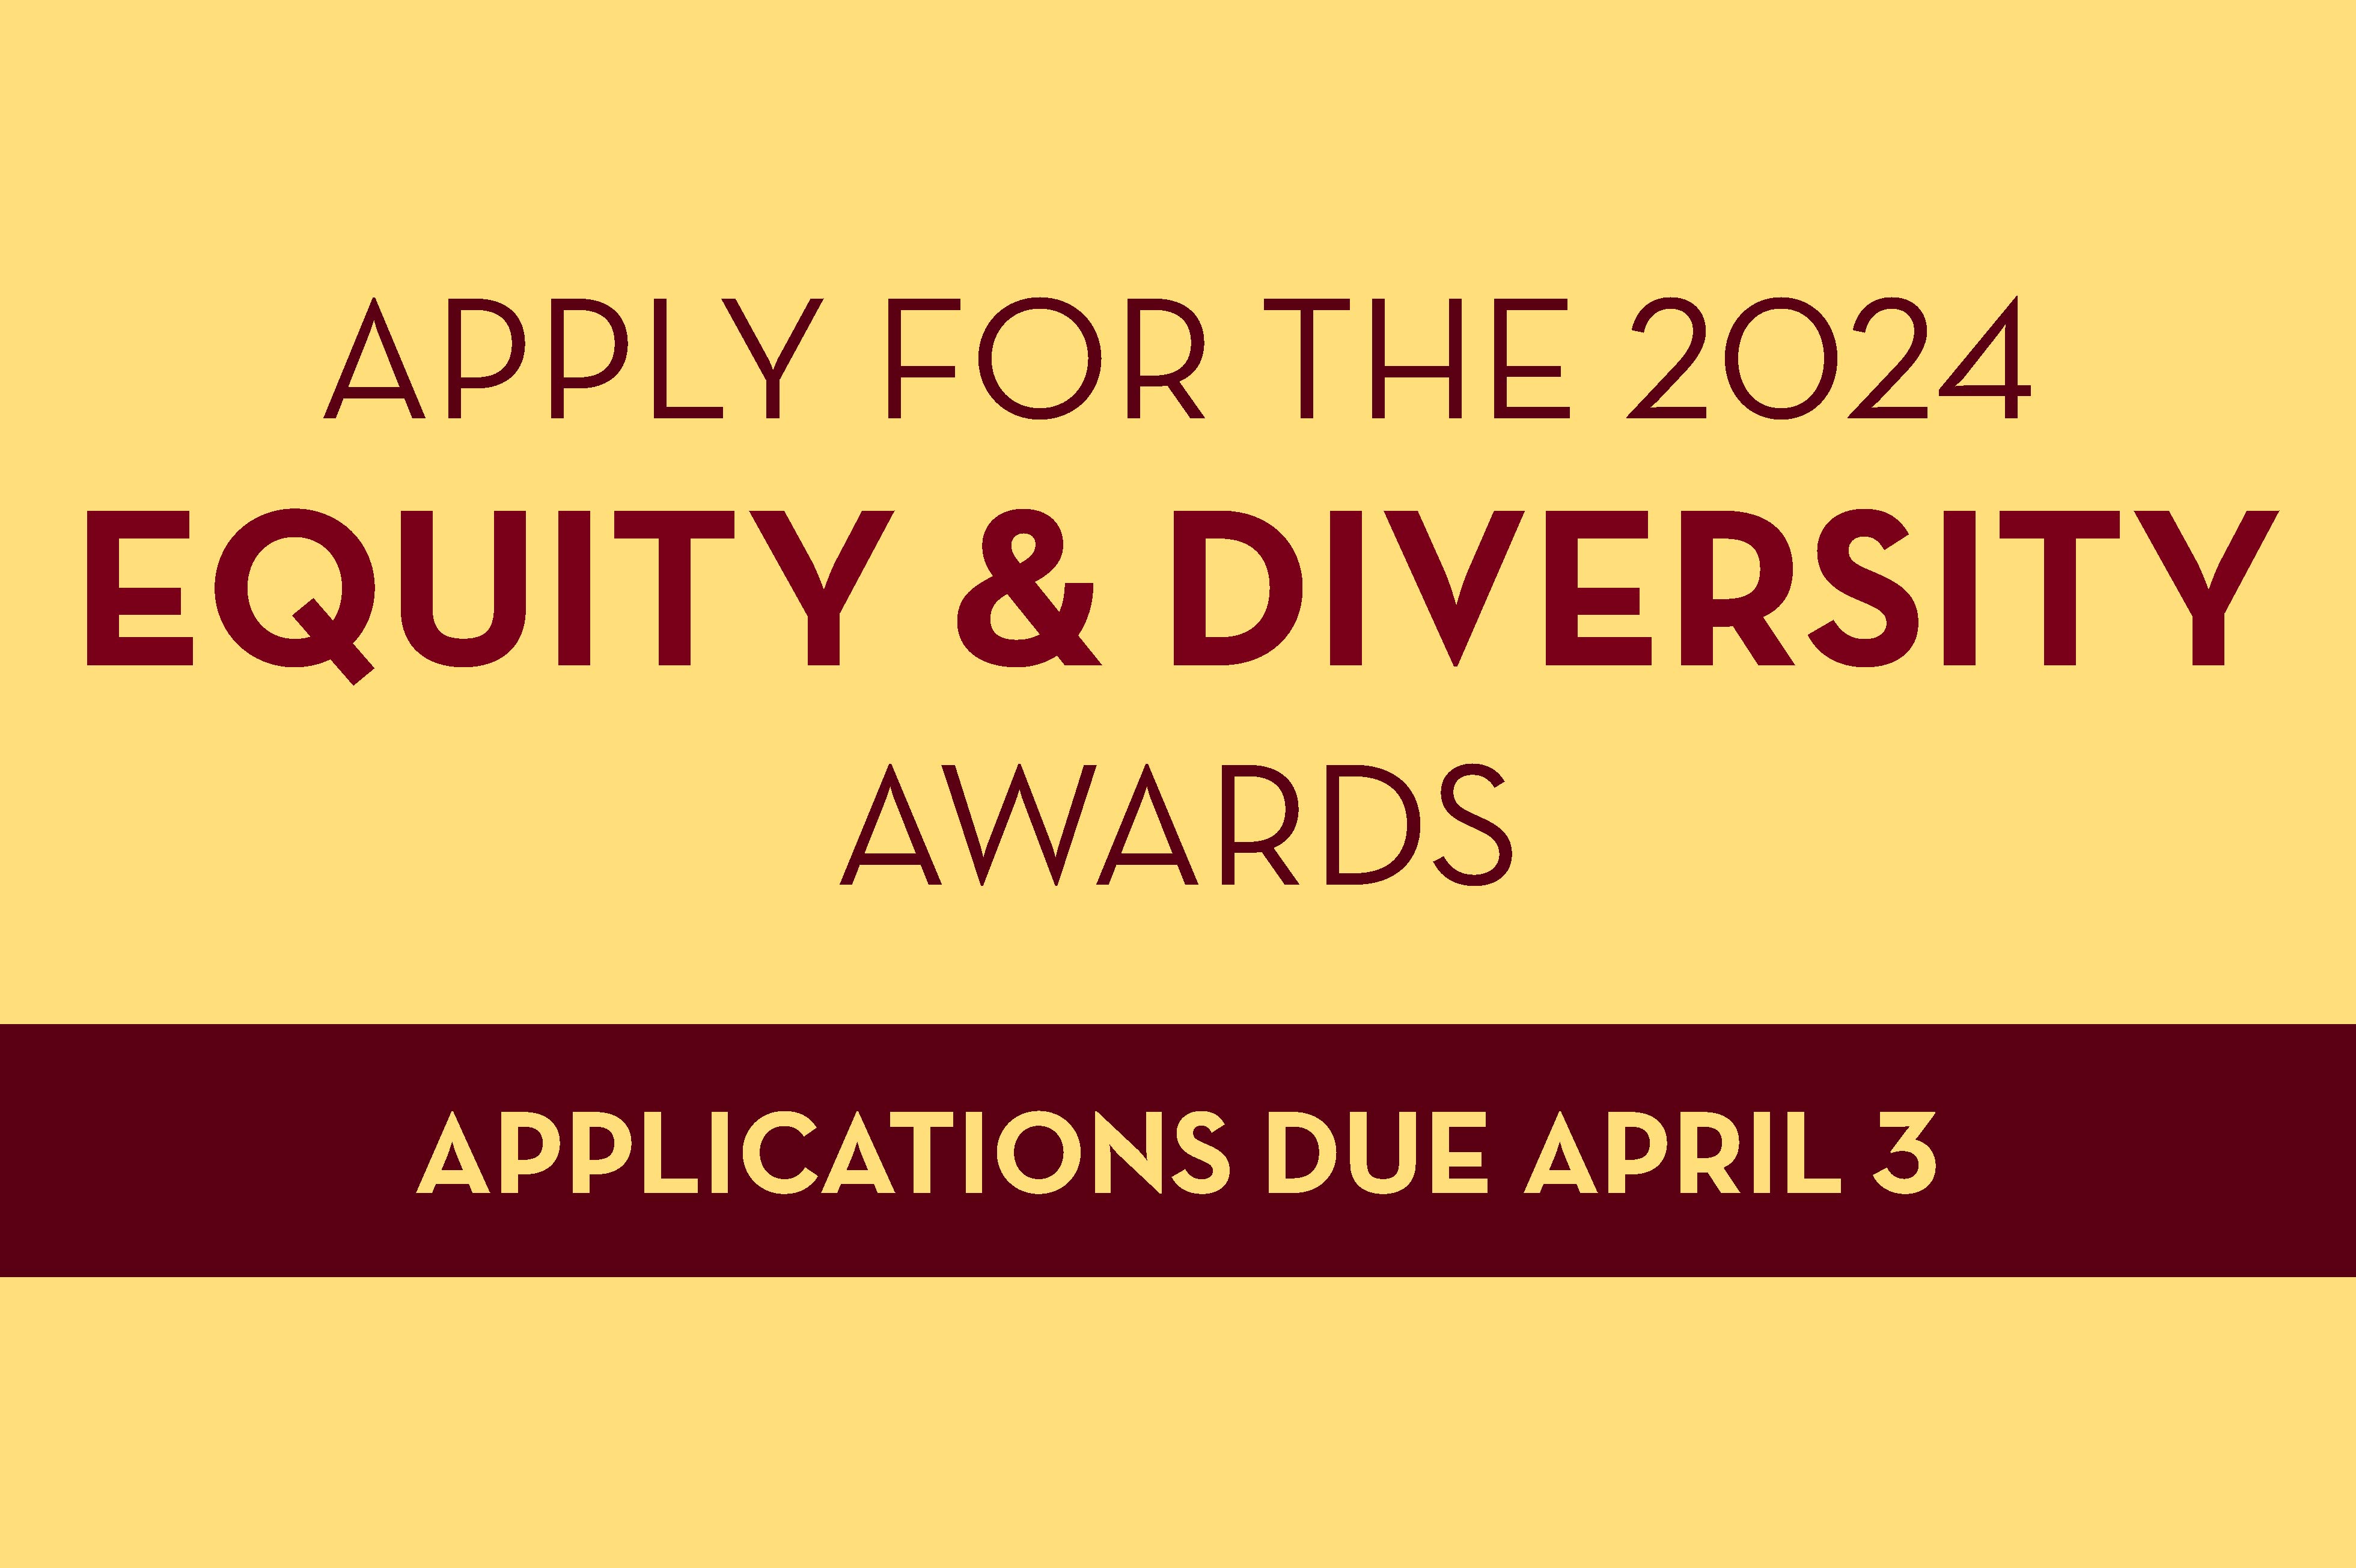 Apply for the 2024 Equity & Diversity awards. Applications due April 3